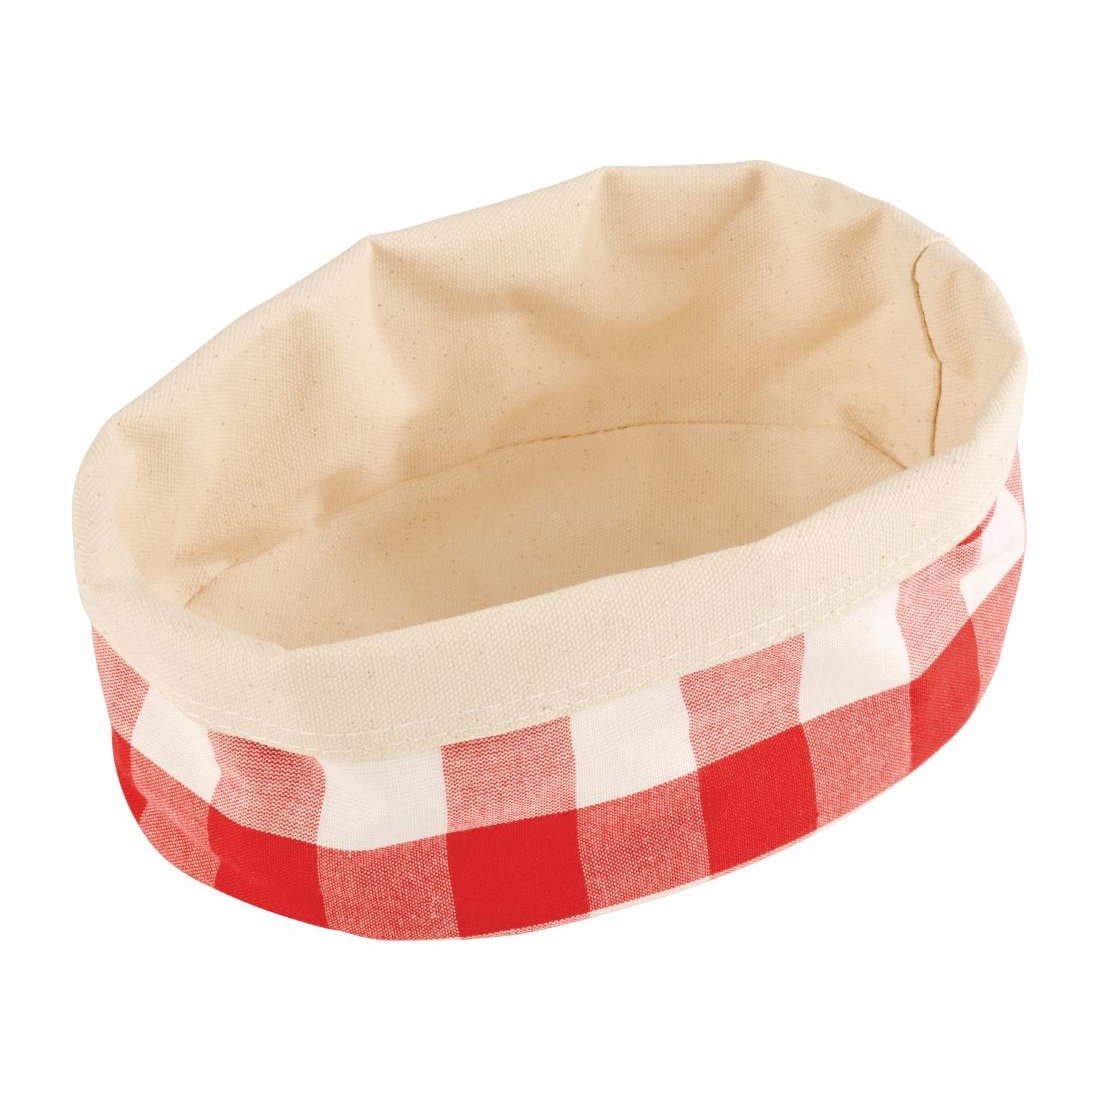 APS Bread Basket Oval Small Red